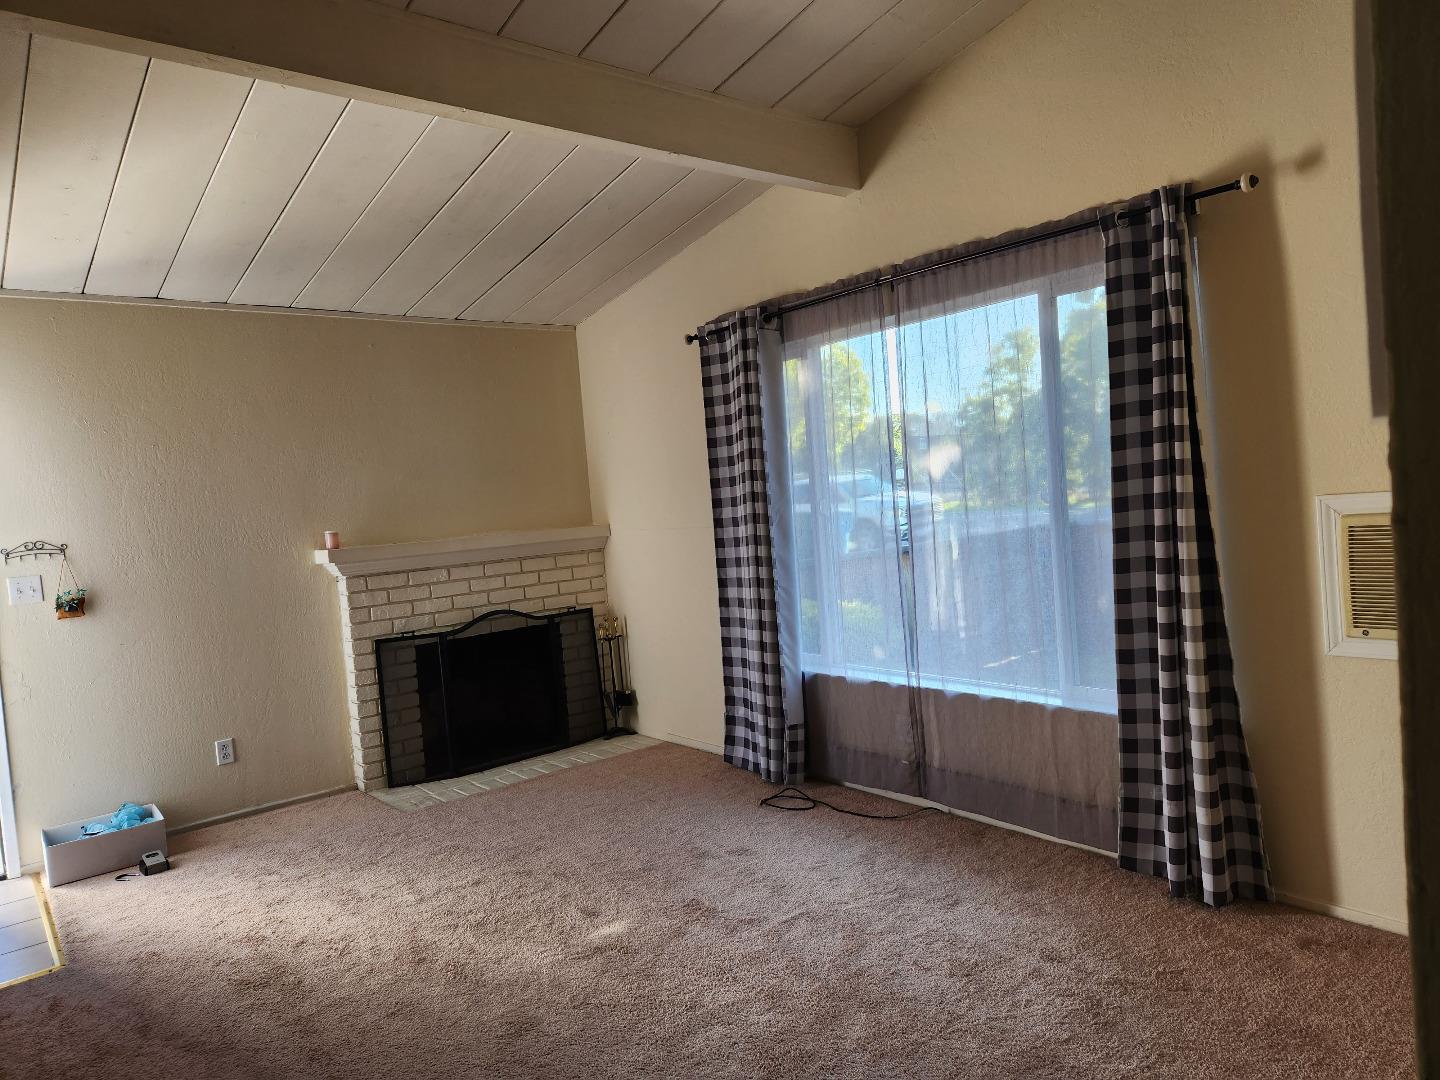 a view of empty room with fireplace and window